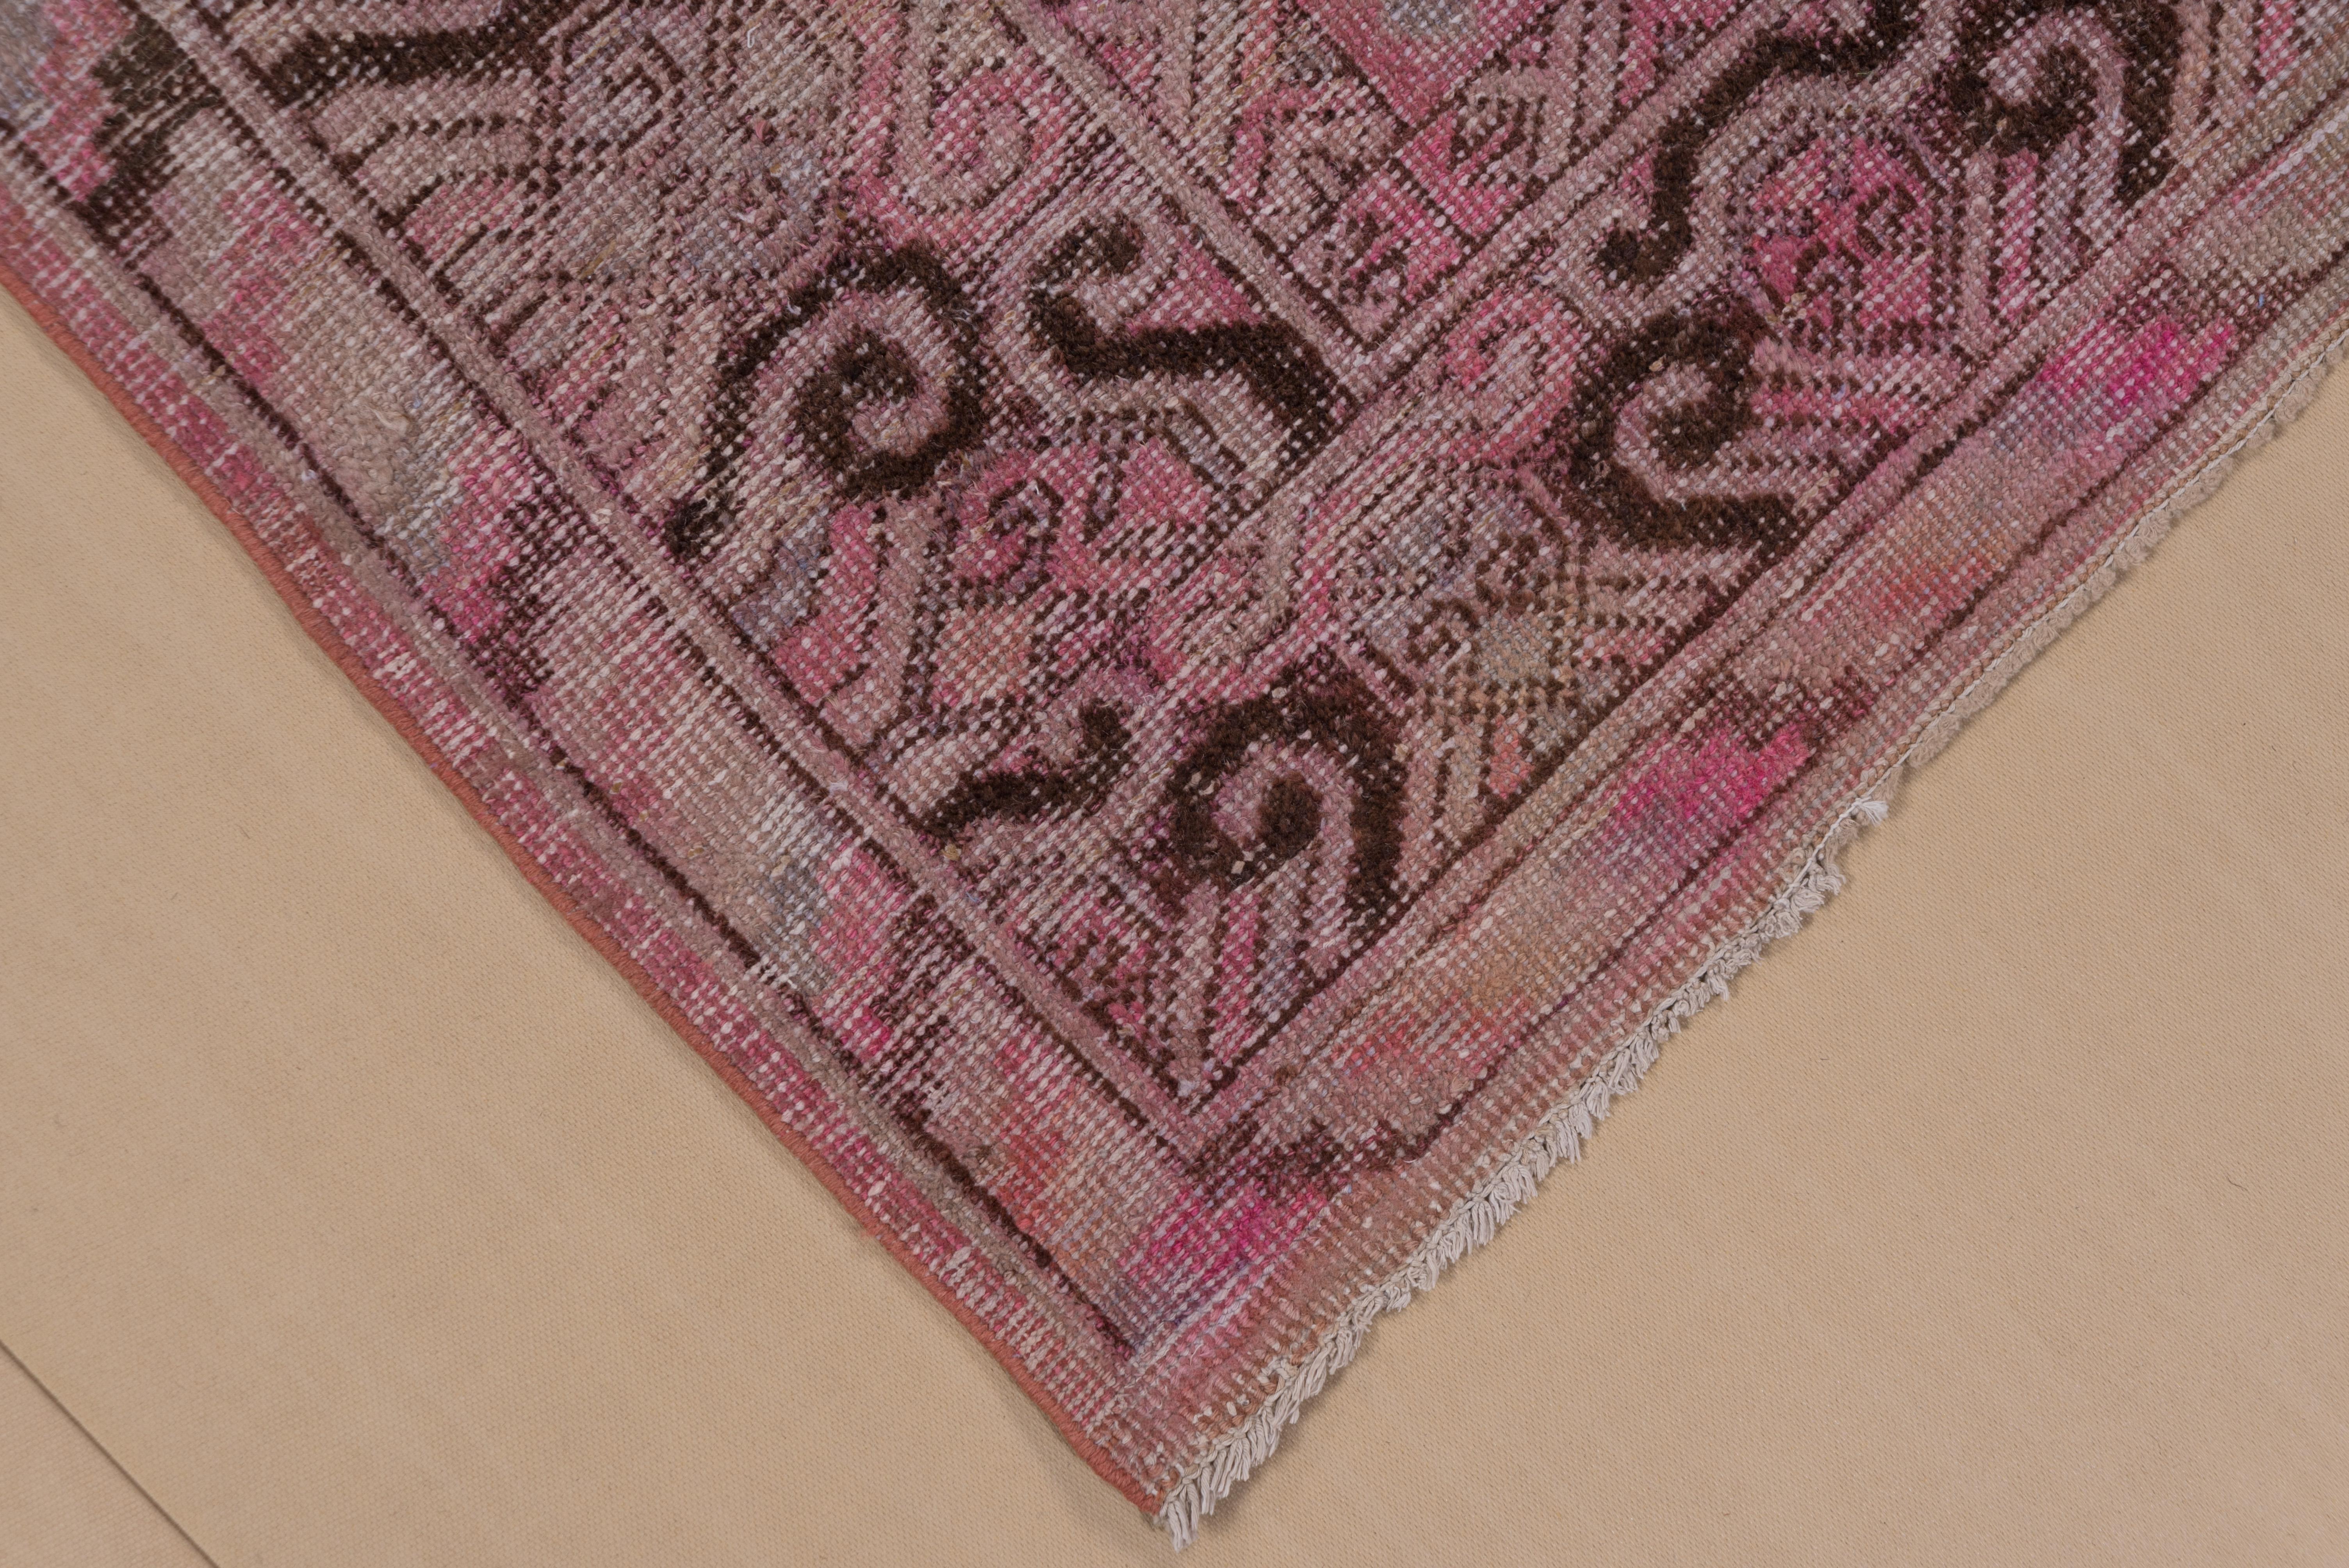 Wool Antique Pink Khotan Rug, Gray Blue and Taupe Field, Pink and Brown Accents